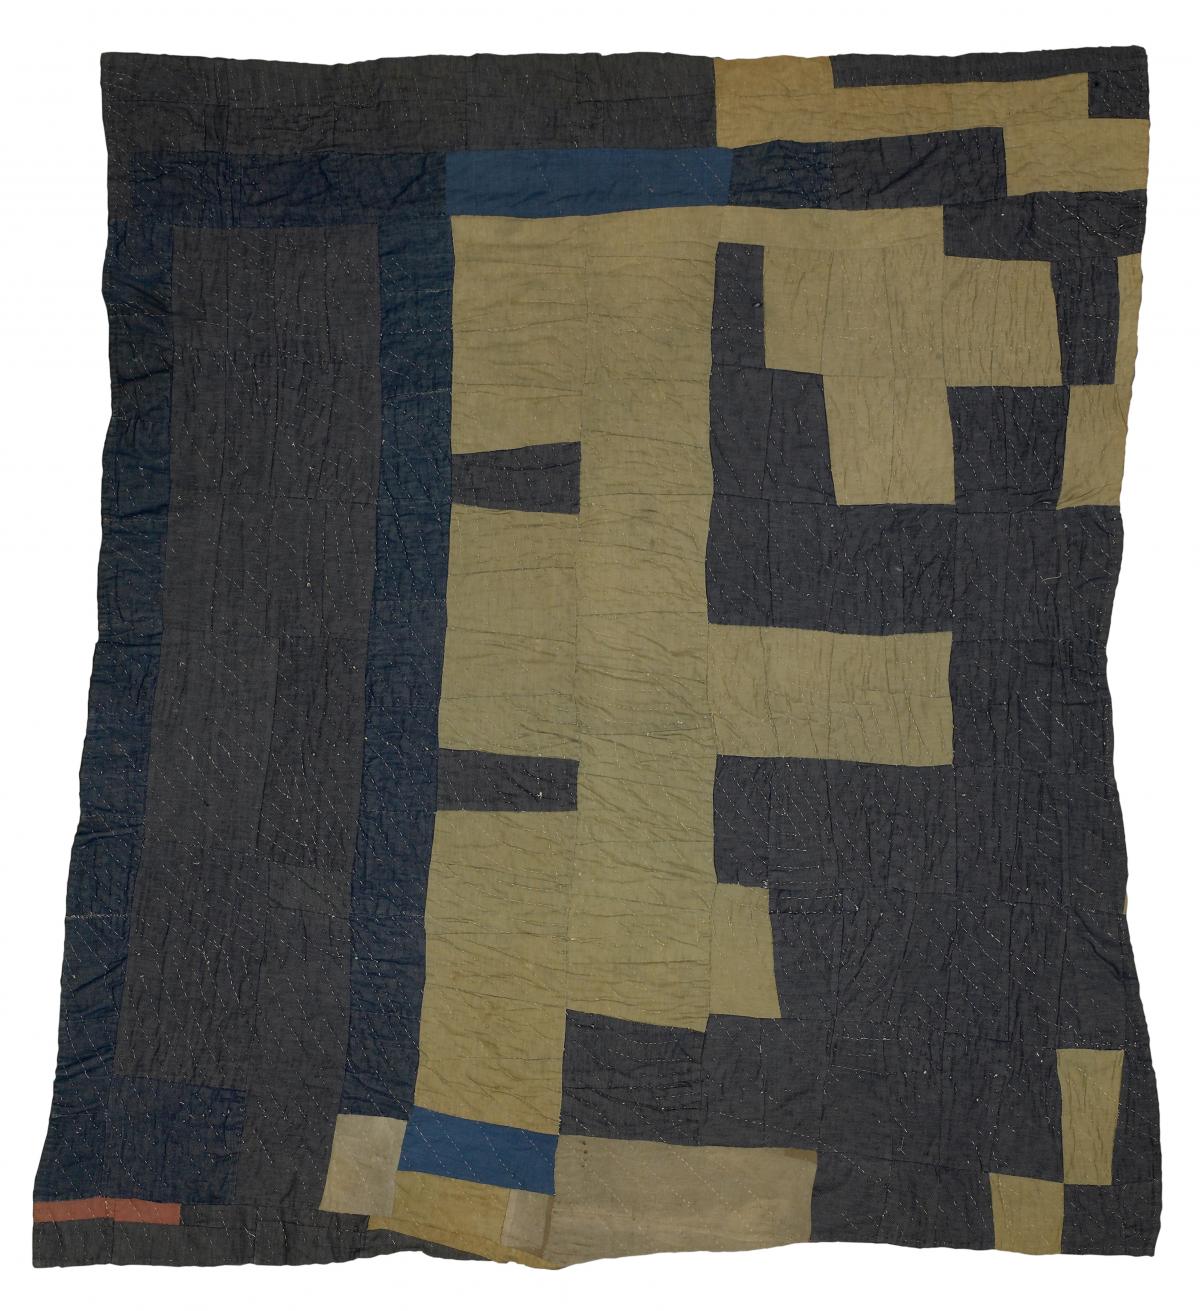 Quilt with dark gray-blue and tan geometric shapes